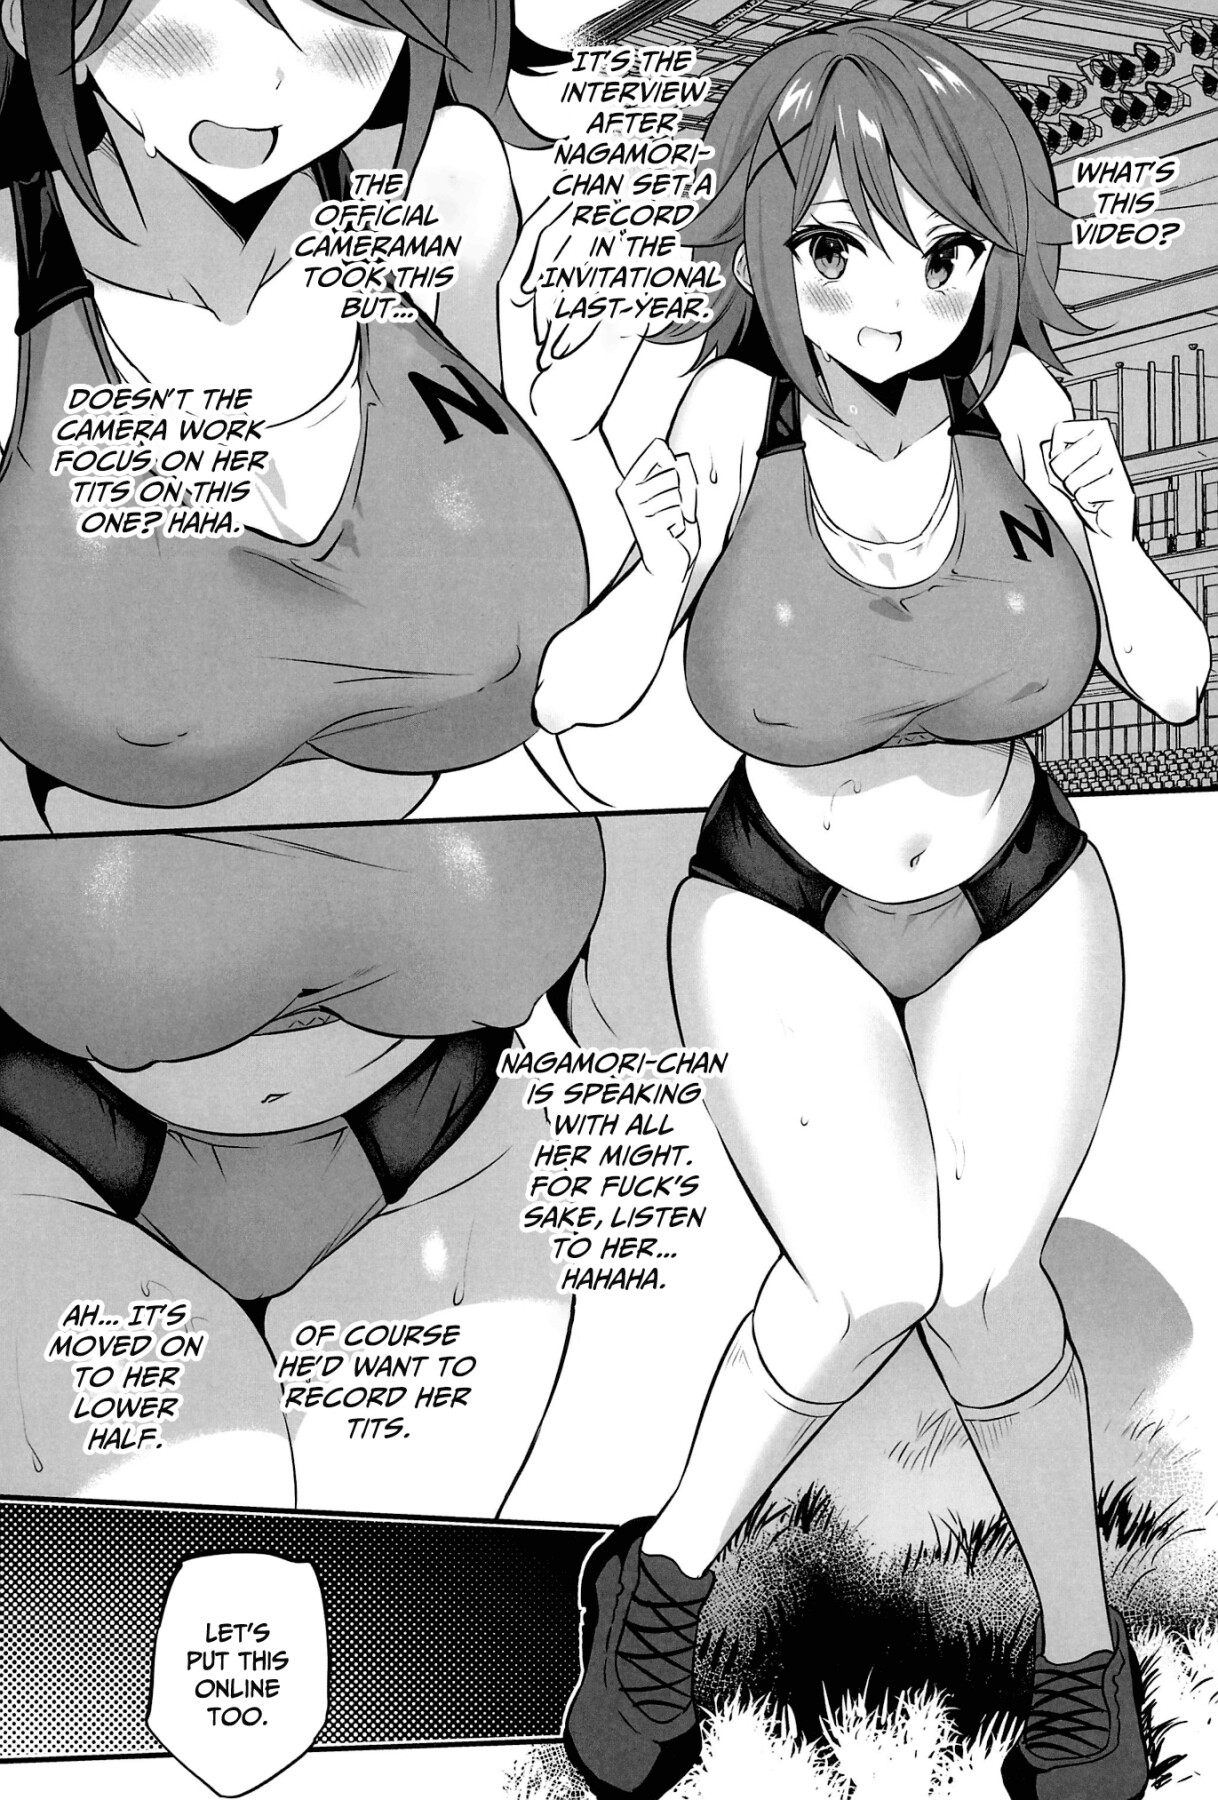 Hentai Manga Comic-School In The Spring of Youth 18-Read-2